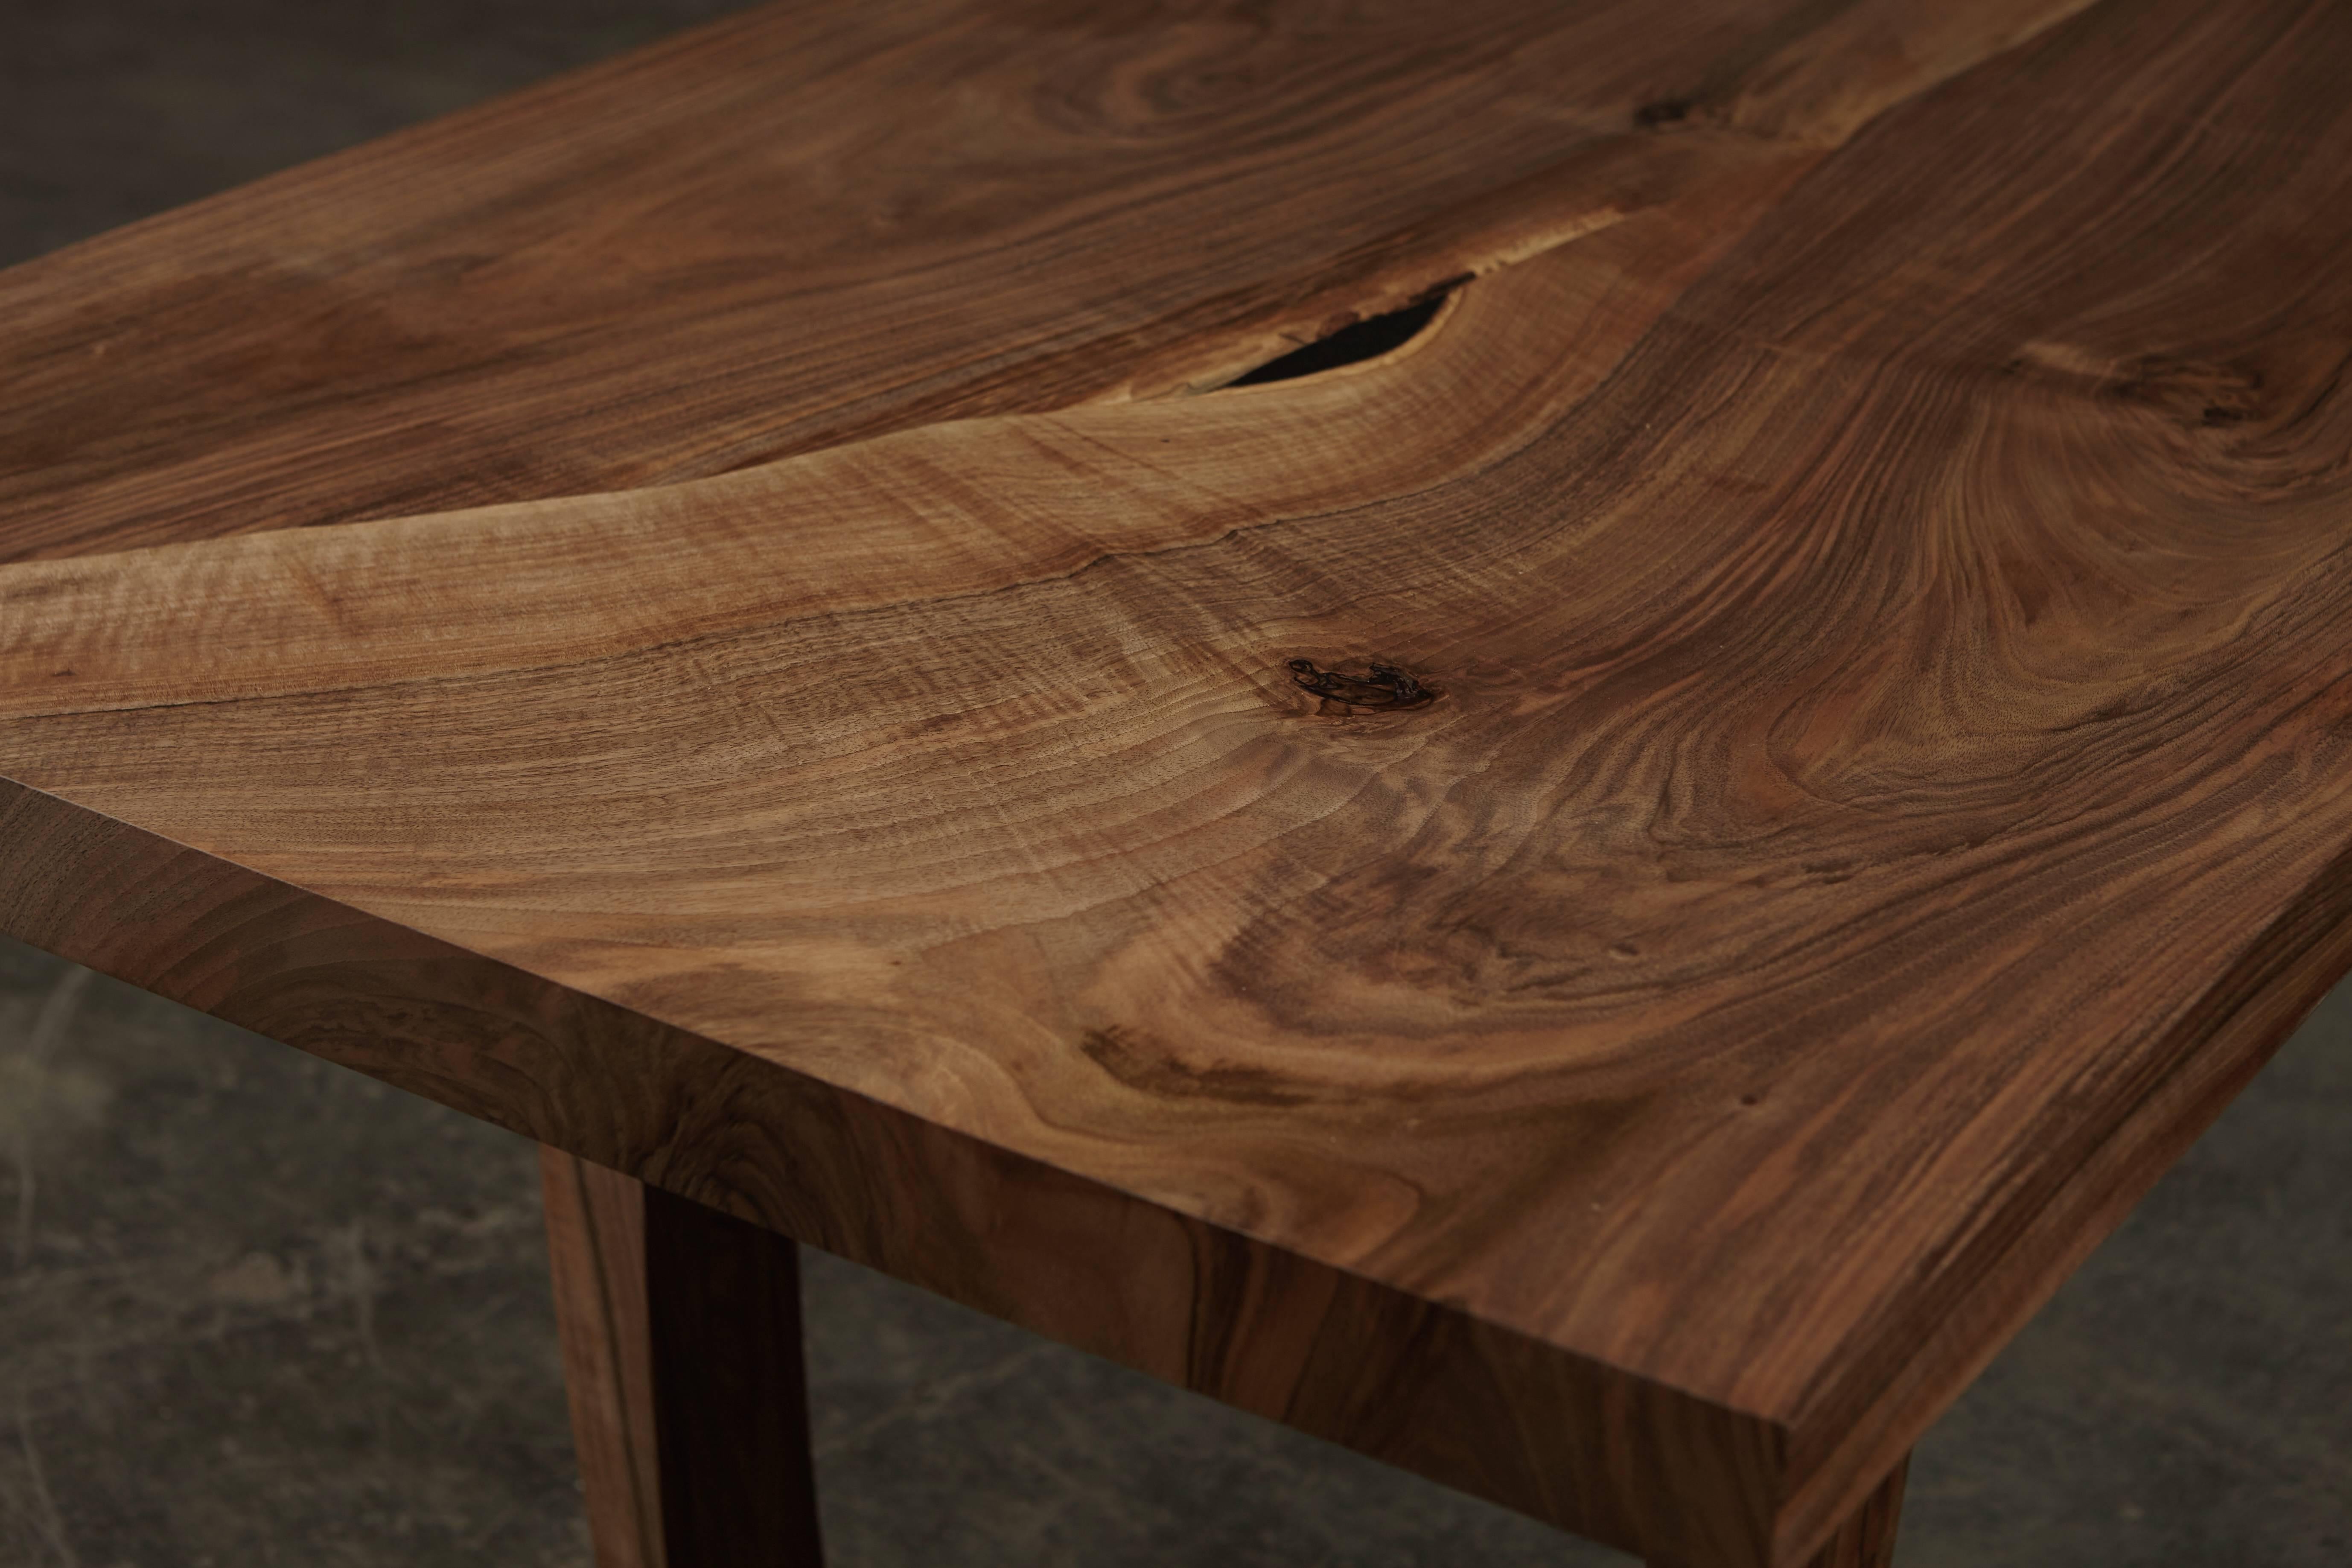 Organic Modern Ripple walnut dining table with inset live edge. Bespoke sizes by Jonathan Field